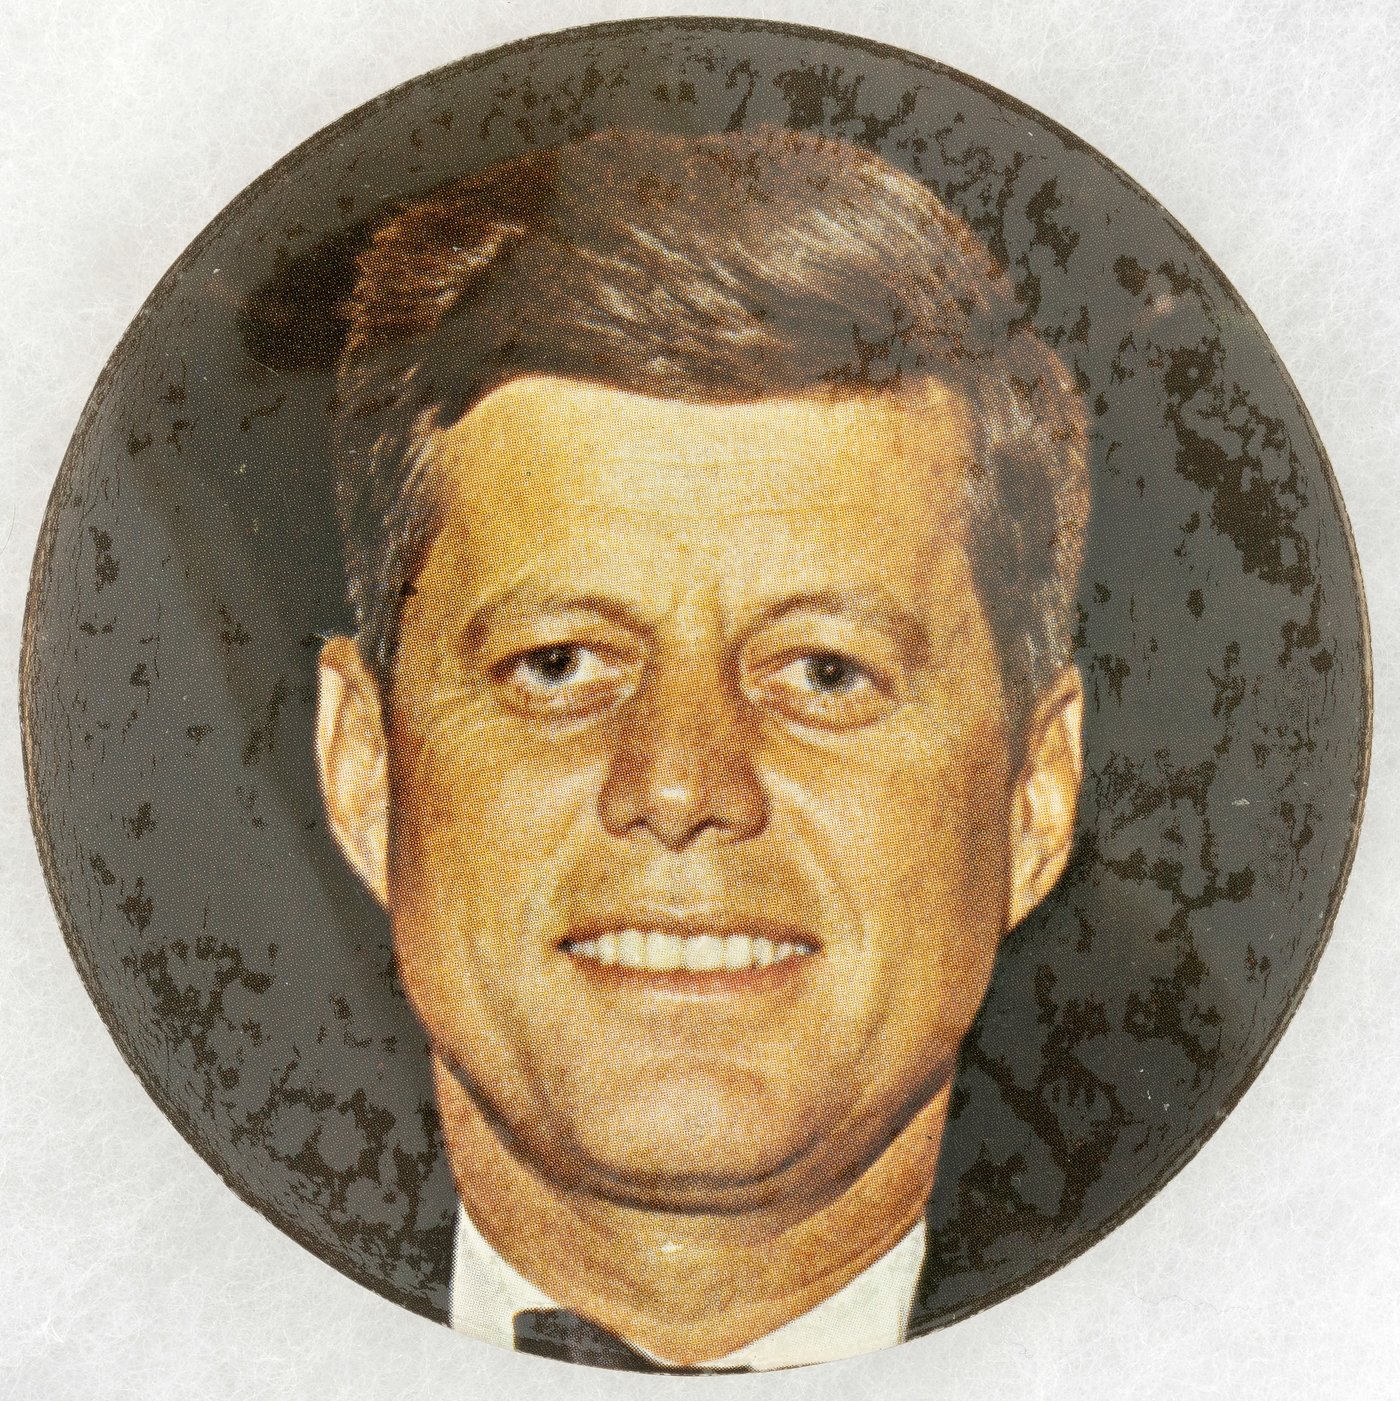 Hake's - JOHN KENNEDY BUTTON MADE DURING 1960 CAMPAIGN FOR EMPLOYEES OF ...